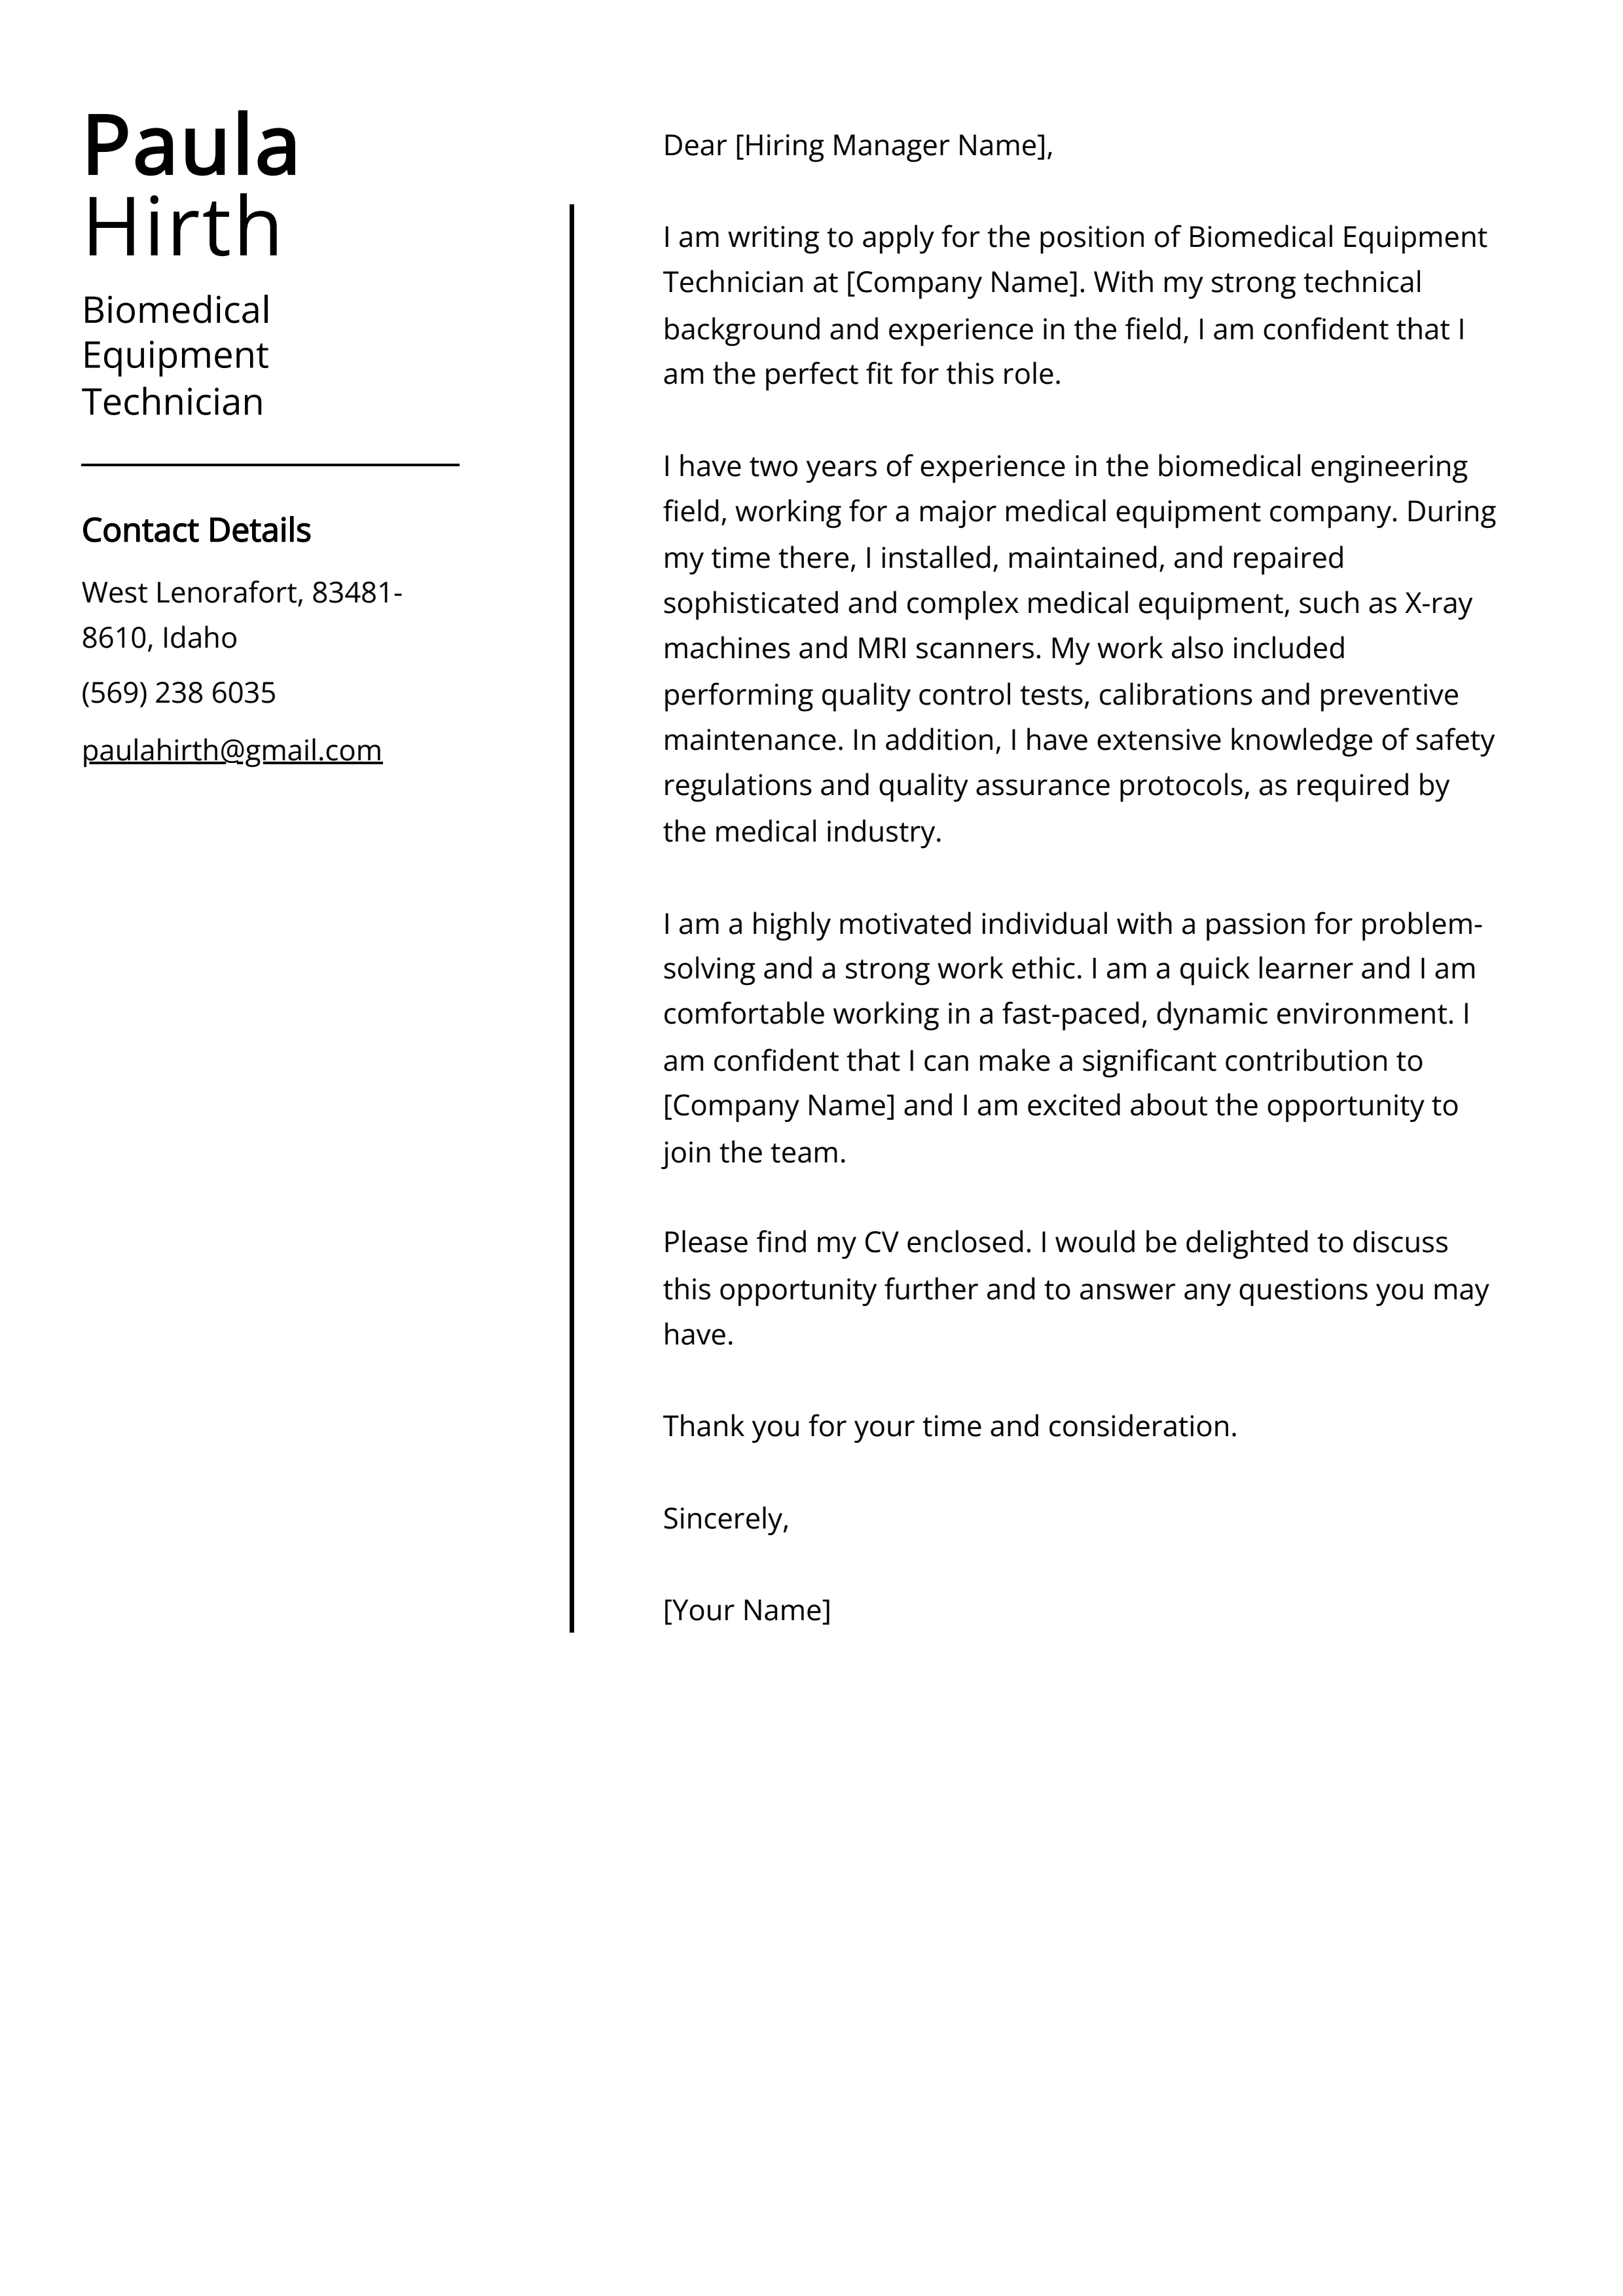 Biomedical Equipment Technician Cover Letter Example